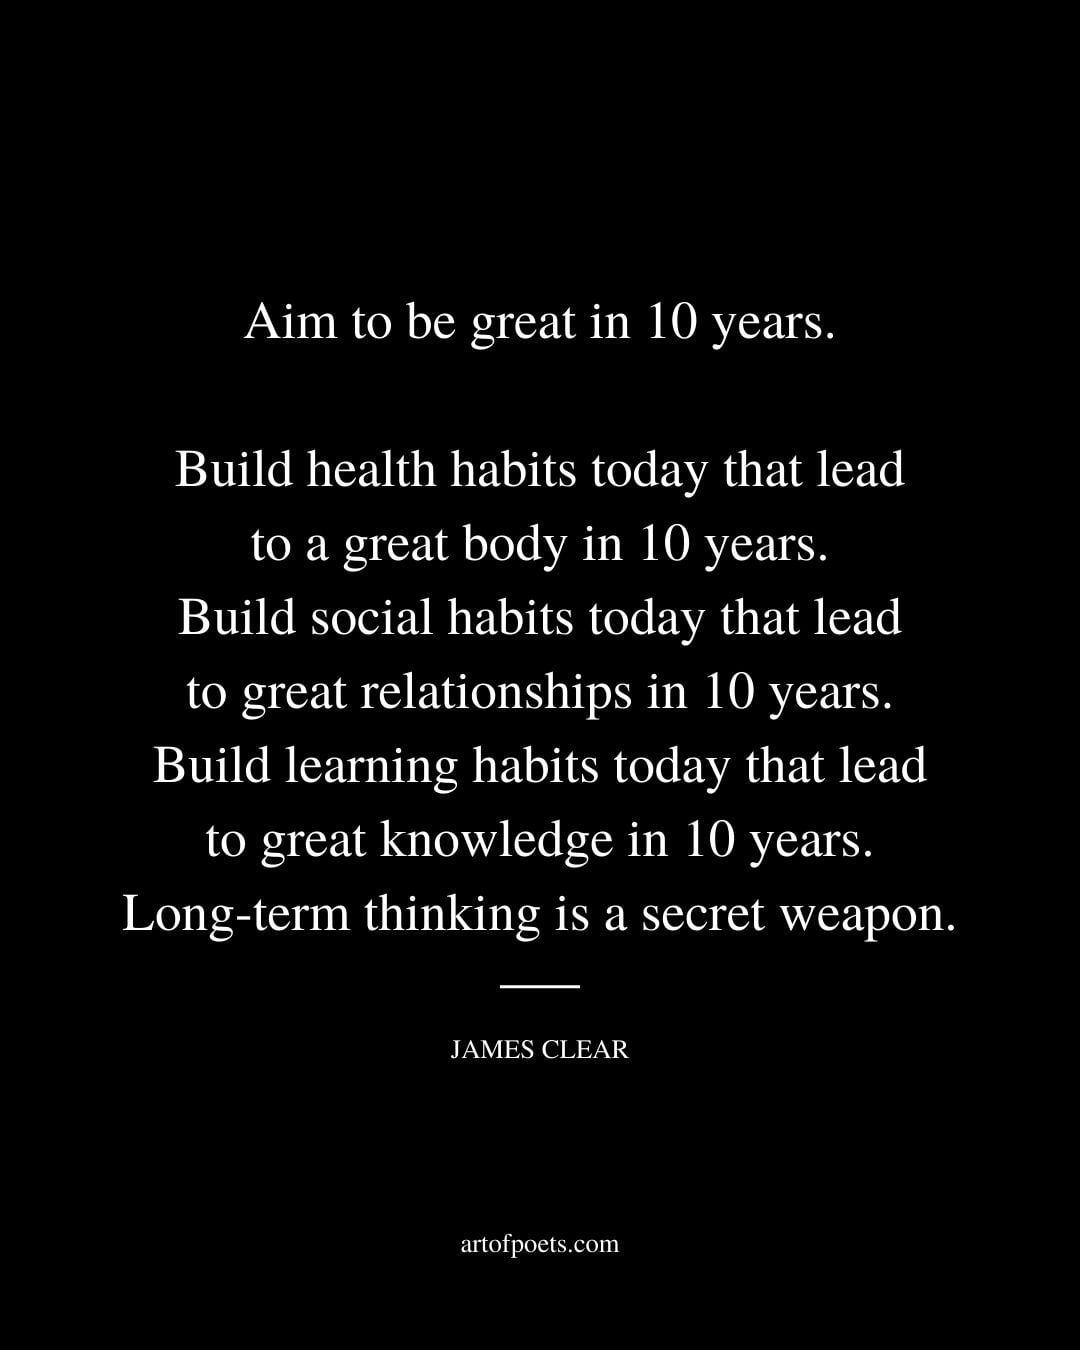 Aim to be great in 10 years. Build health habits today that lead to a great body in 10 years. Build social habits today that lead to great relationships in 10 years